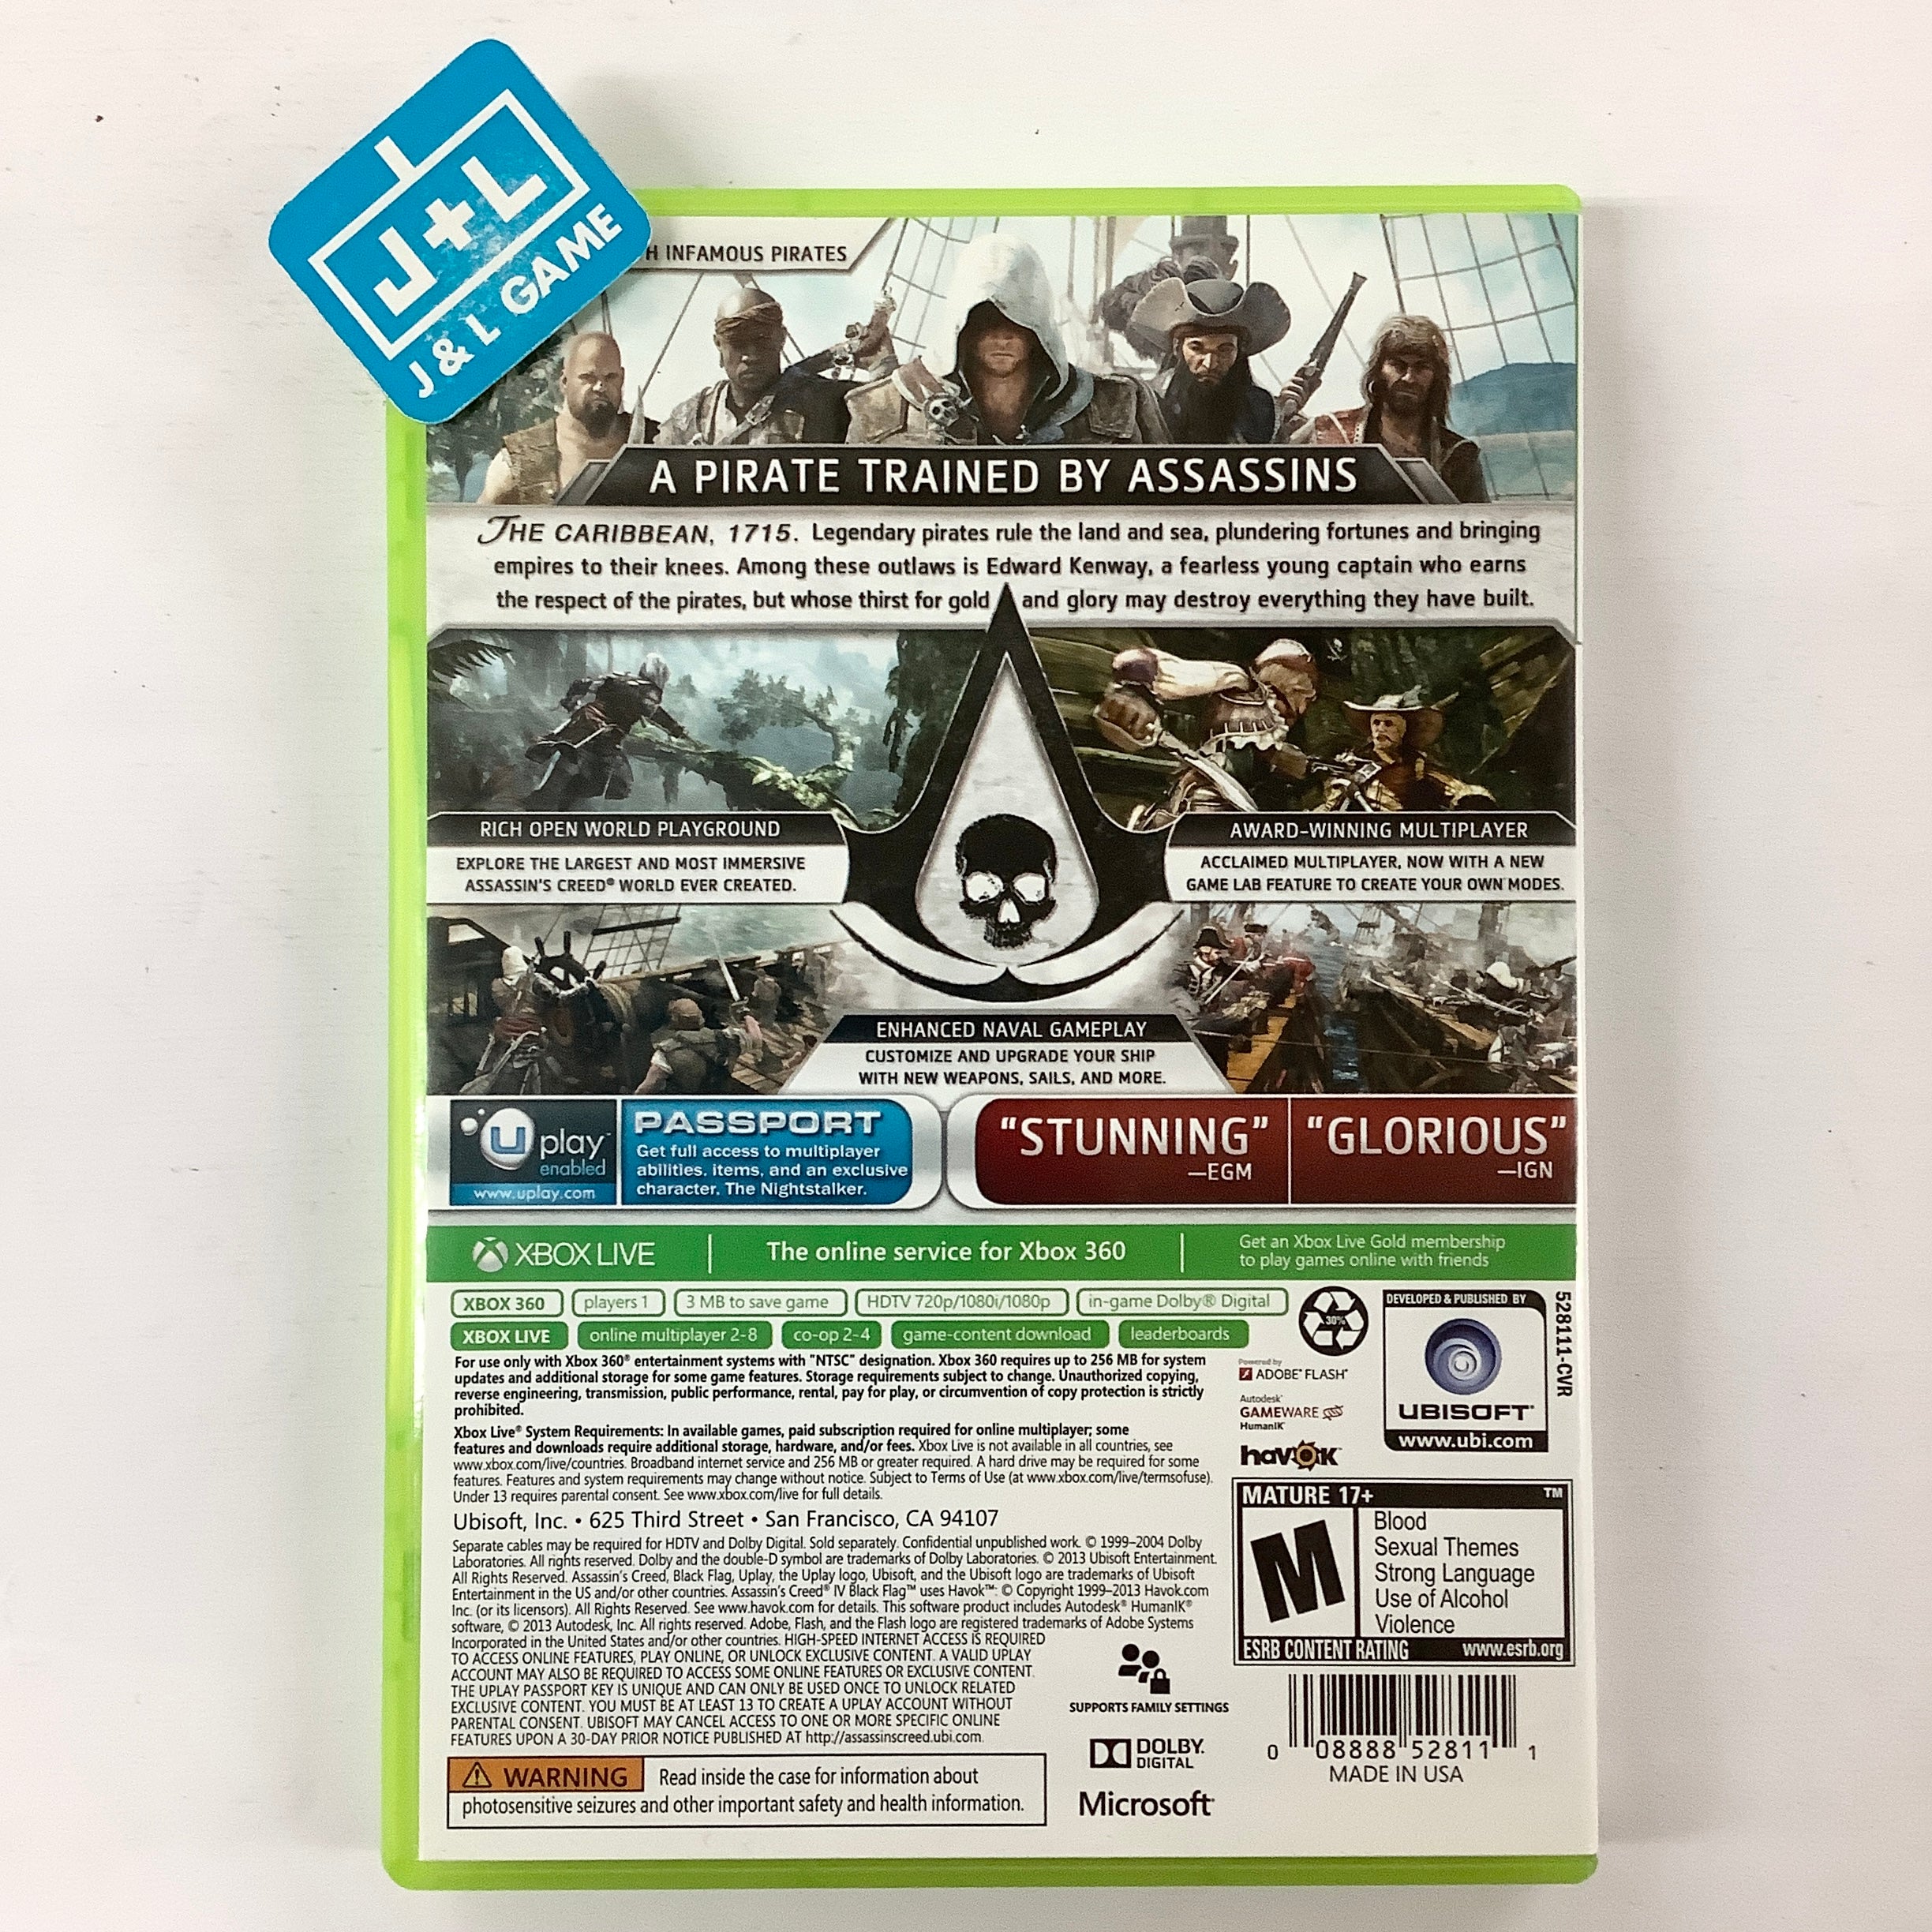 Assassin's Creed IV: Black Flag - Xbox 360 [Pre-Owned] Video Games Ubisoft   